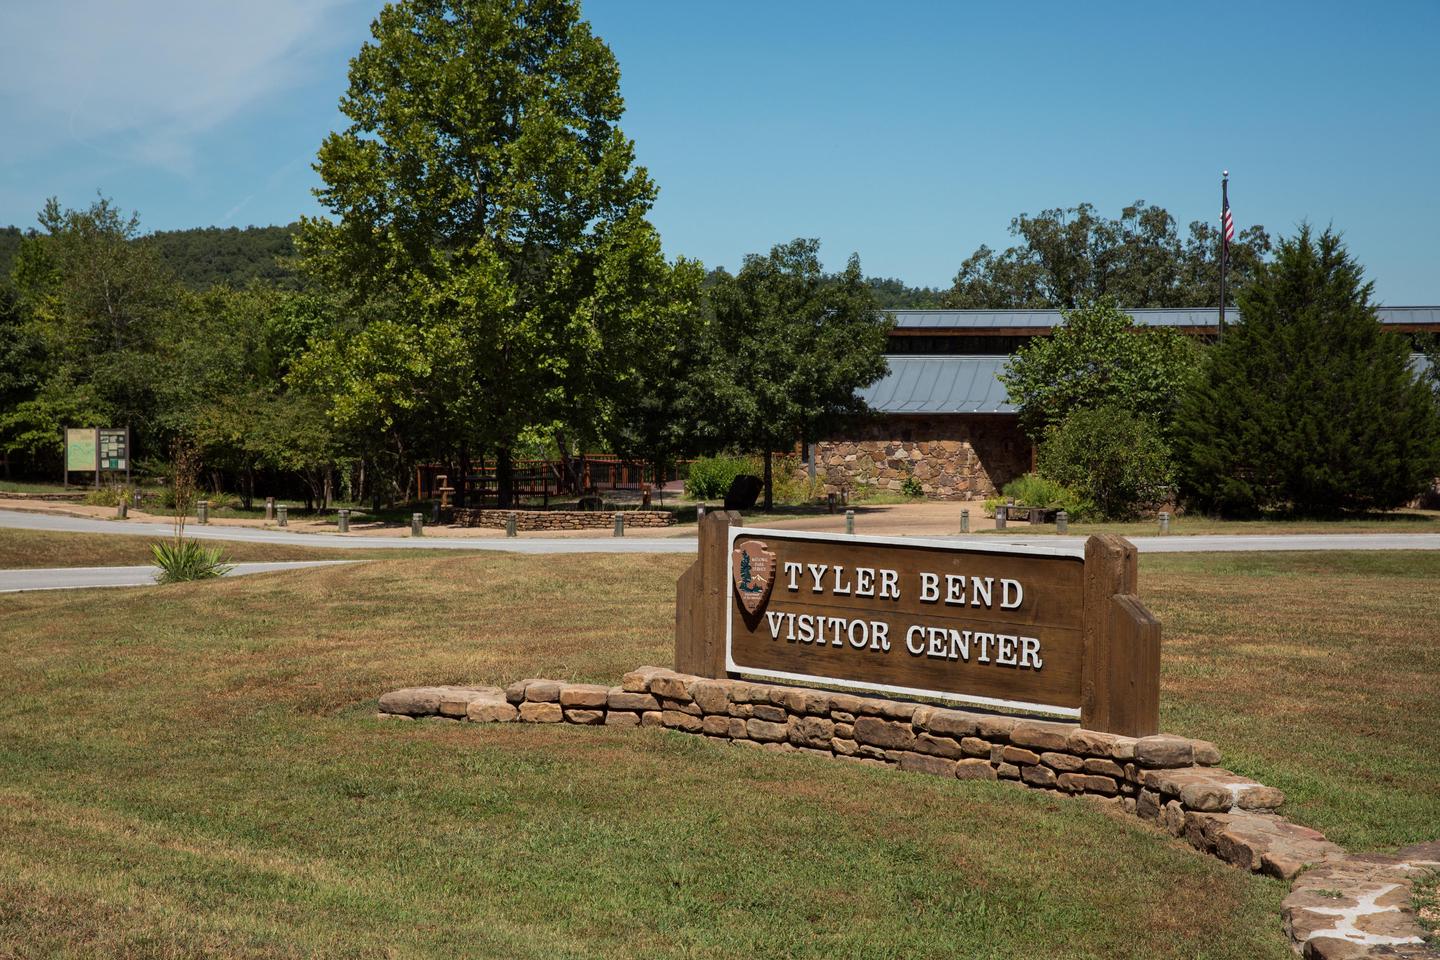 Tyler Bend Visitor Centerhe Tyler Bend Visitor Center is a great place to start planning your visit to Buffalo National River.